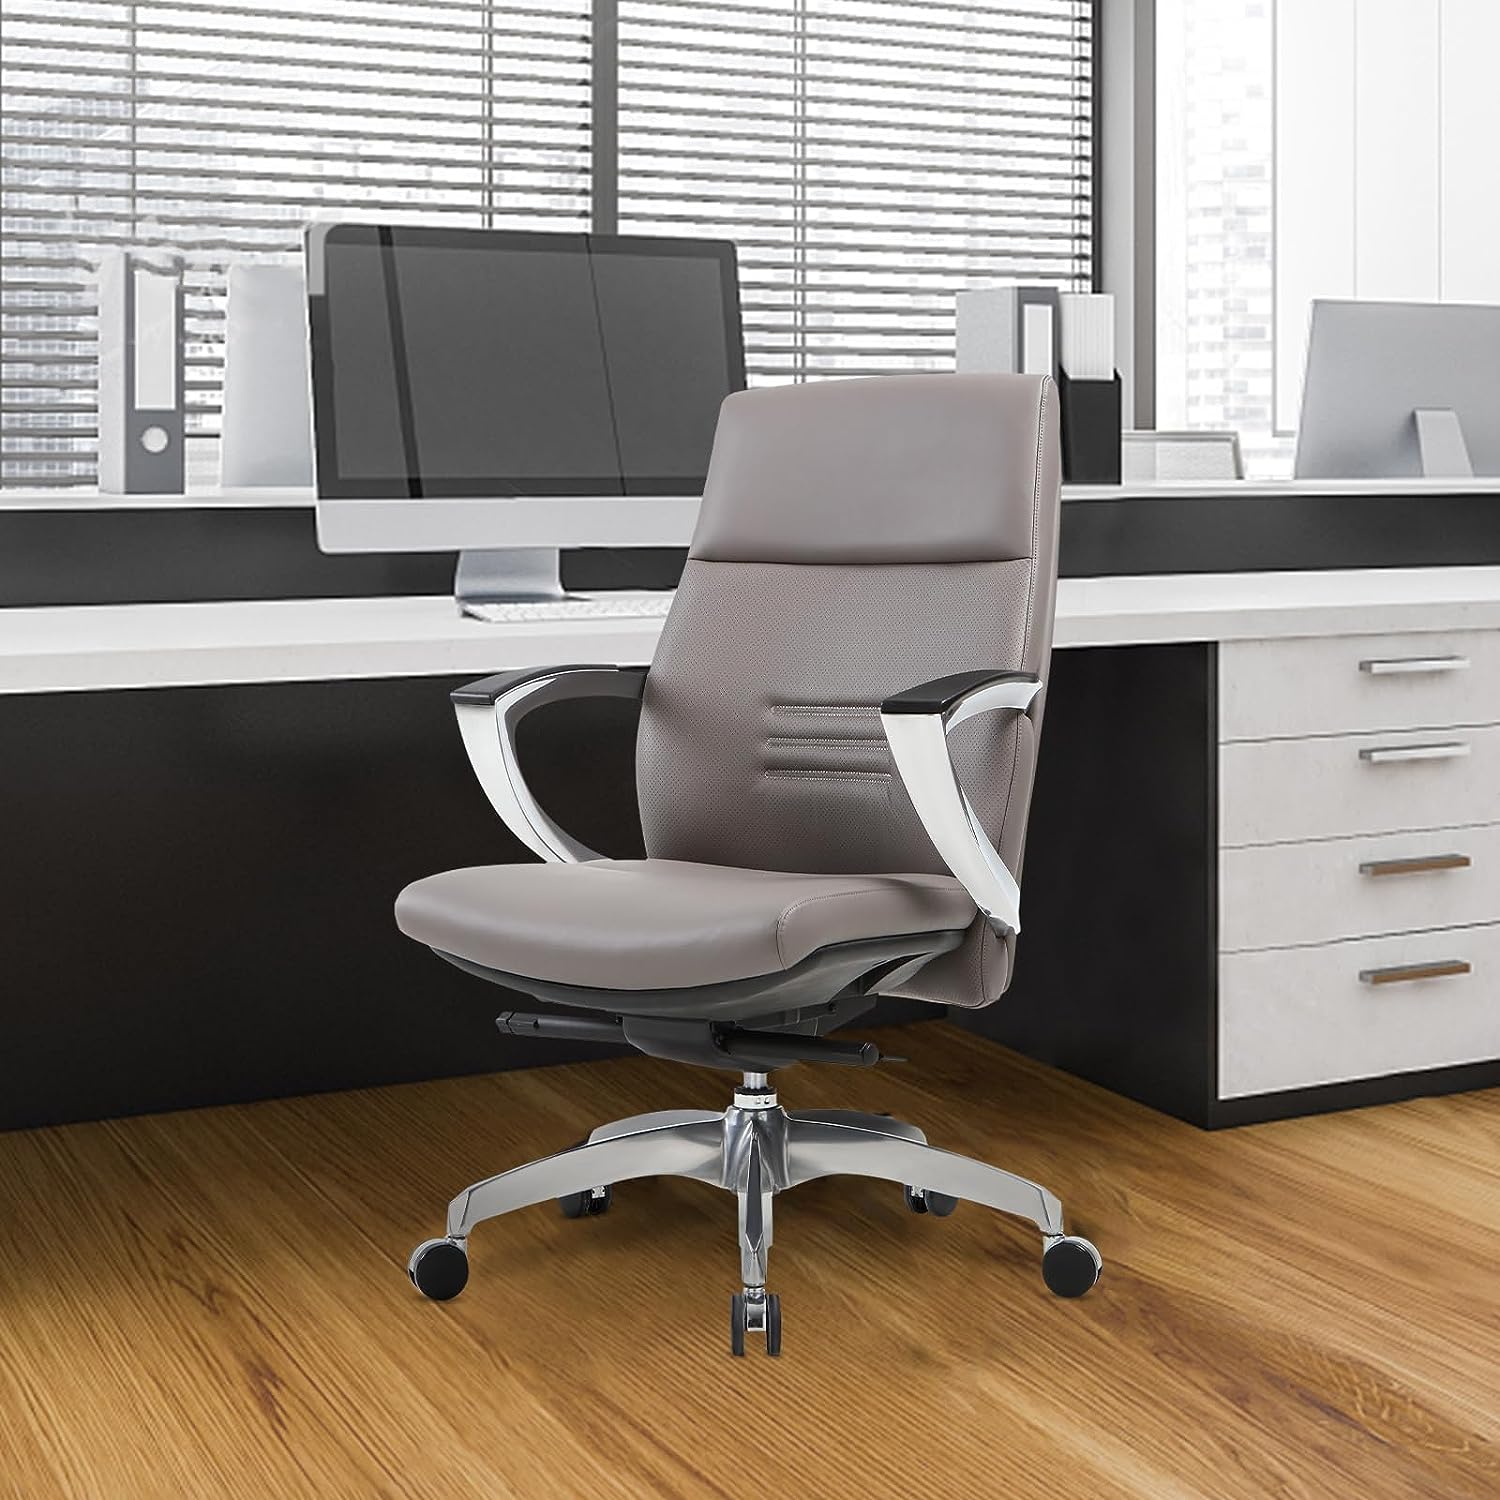 LUCKYERMORE Ergonomic Leather Office Chair with Adjustable Height and Tilt Function, 360° Swivel for Home Office, Gray